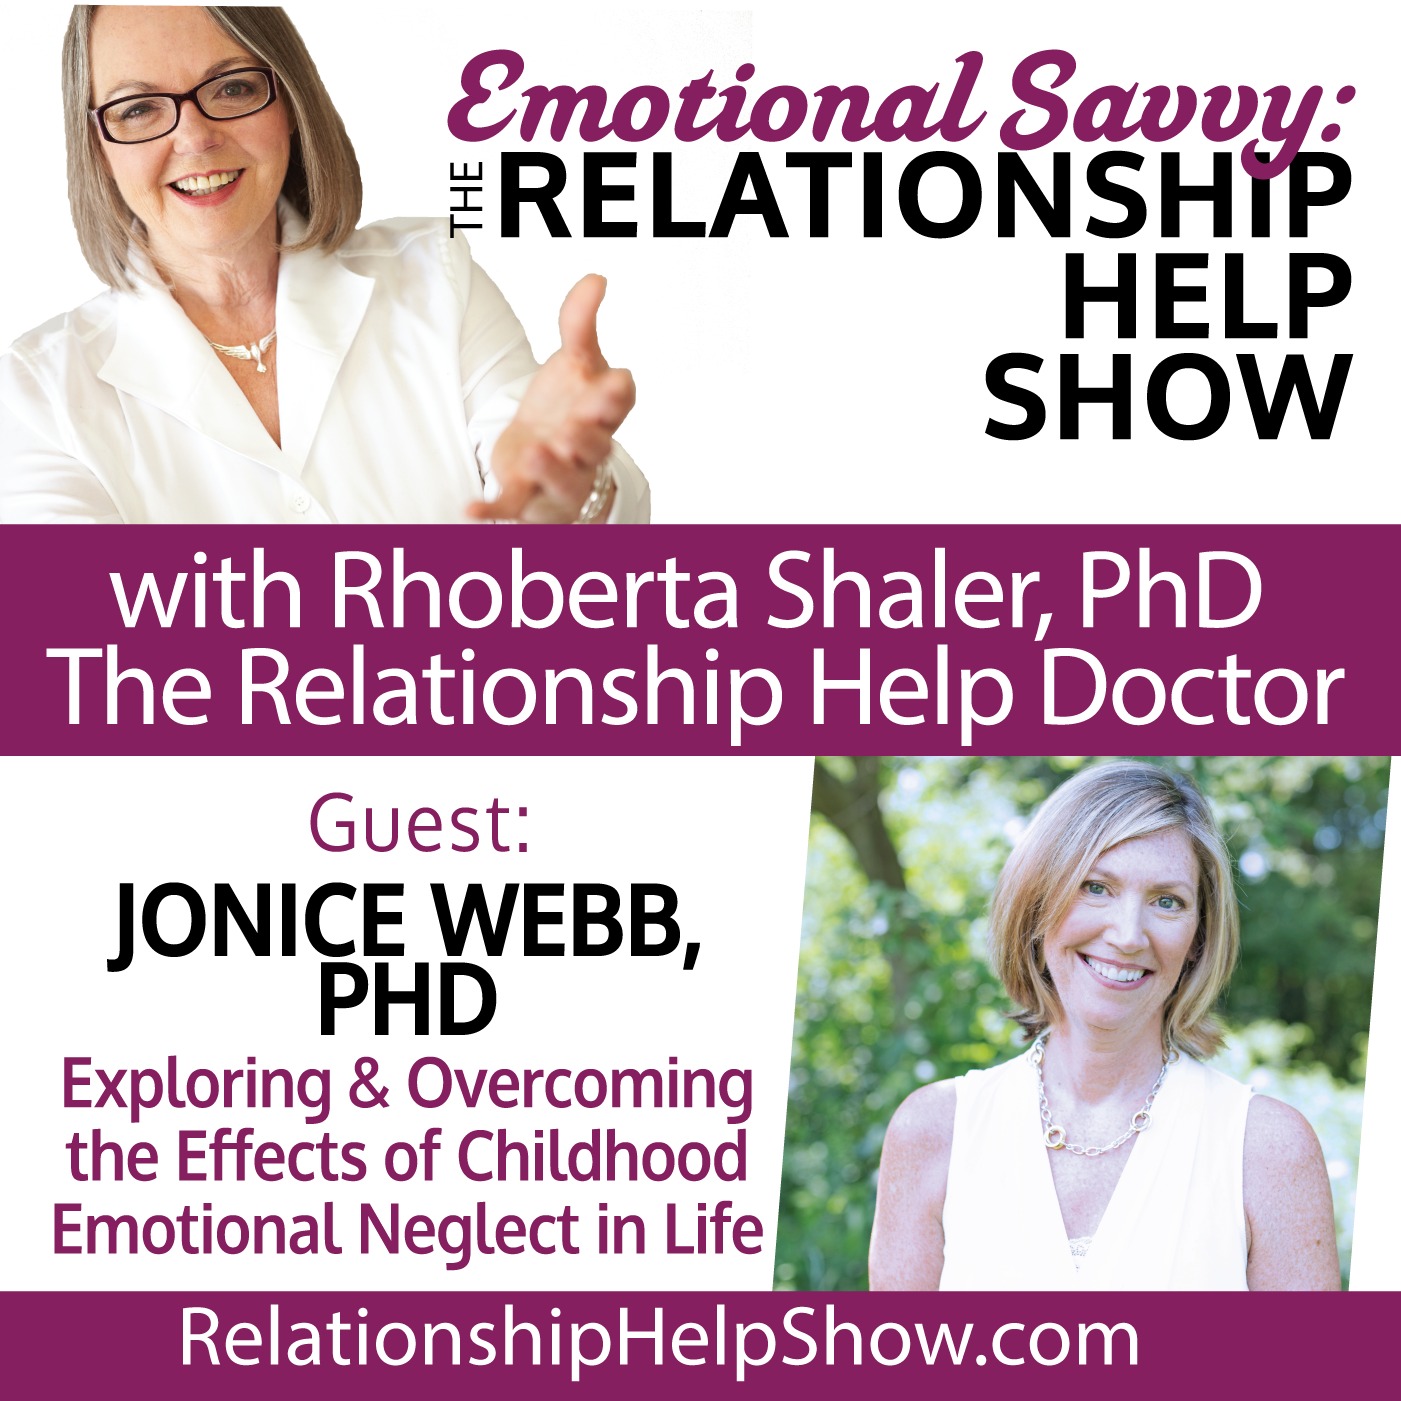 The Impact of Emotional Abuse on Children and The Adults They Become. GUEST: Dr. Jonice Webb